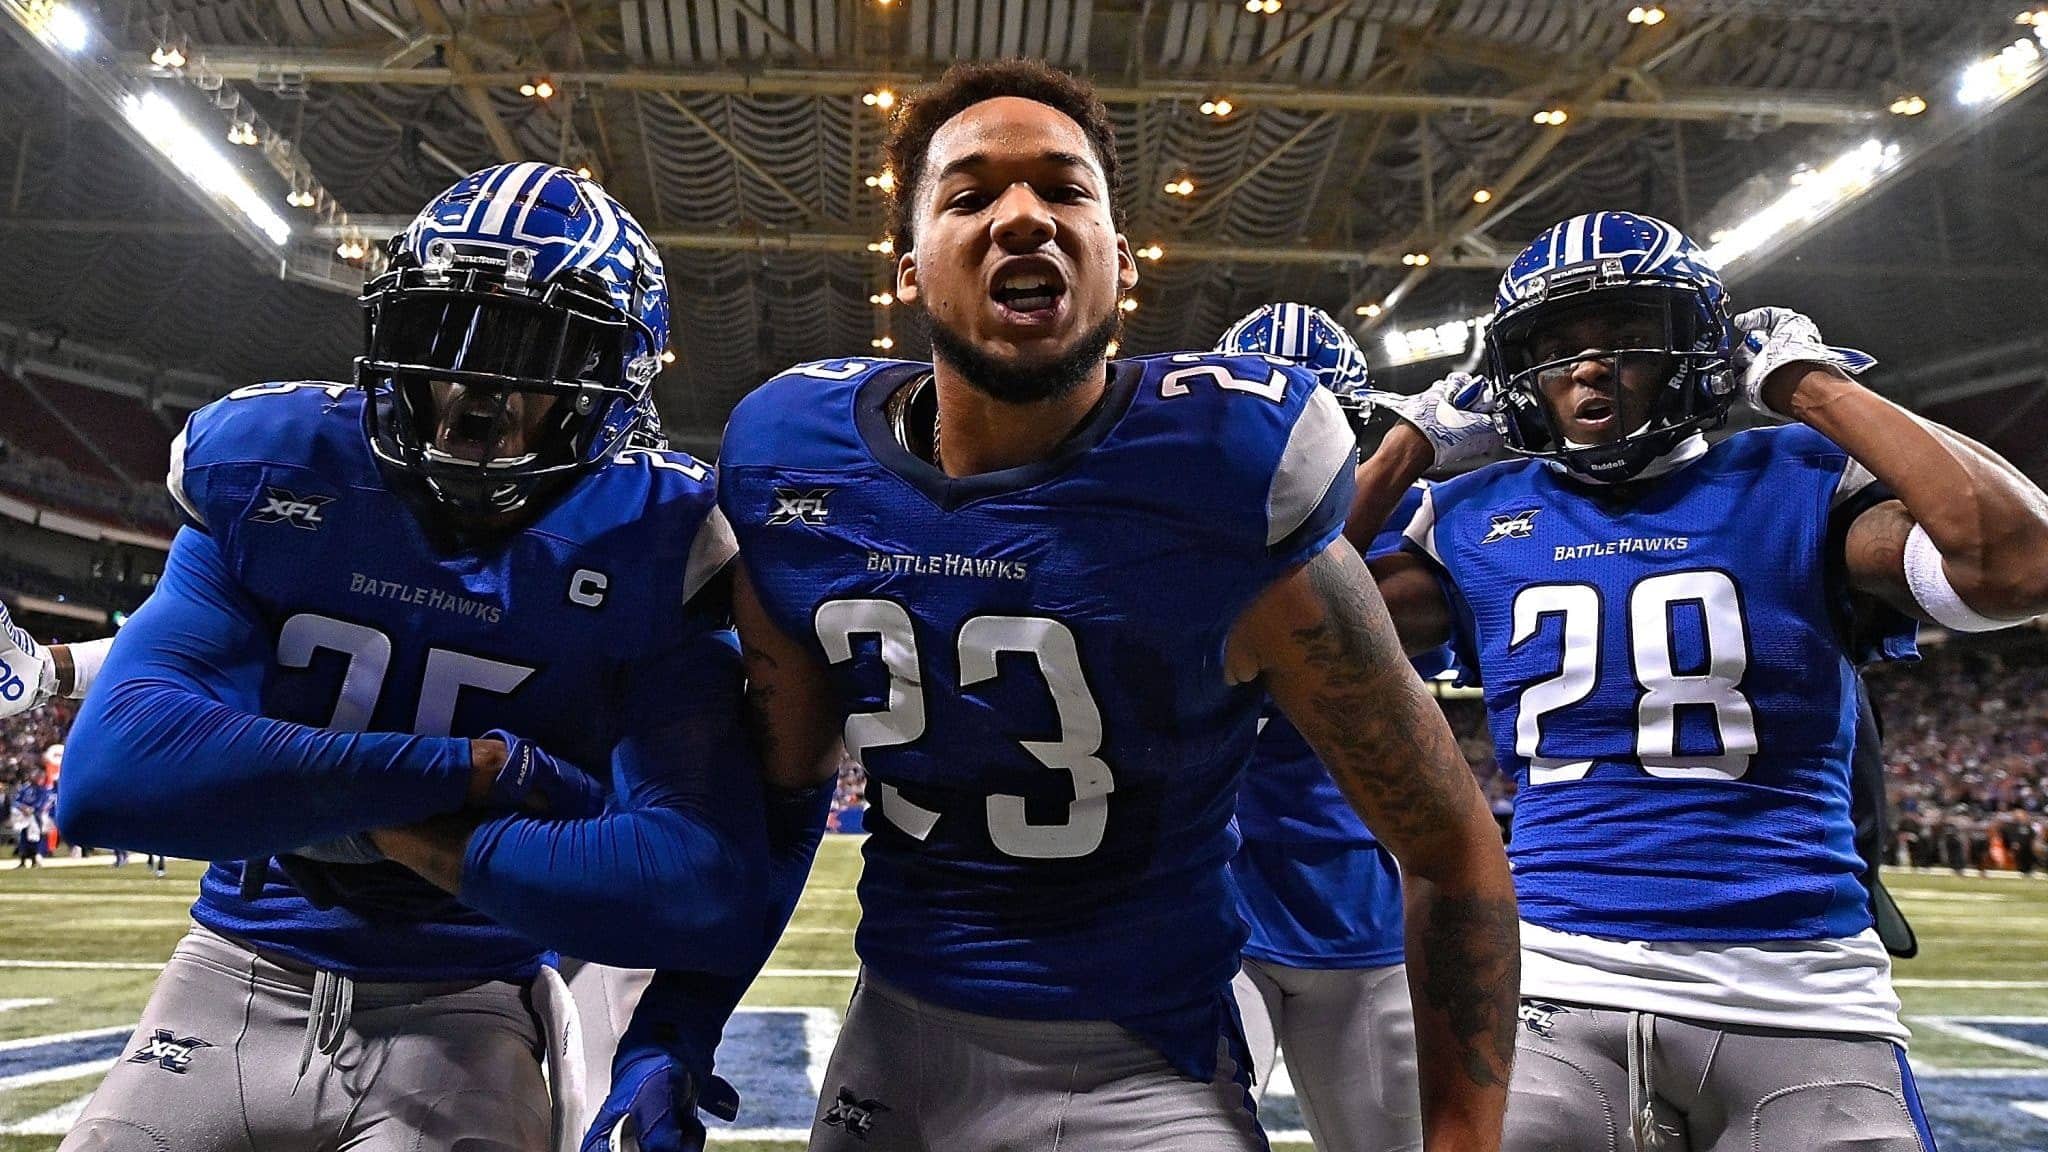 ST LOUIS, MO - FEBRUARY 23: Kenny Robinson #23 of the St. Louis Battlehawks celebrates with teammates after intercepting a pass during the first half of an XFL game against the NY Guardians at The Dome at America Center on February 23, 2020 in St Louis, Missouri.